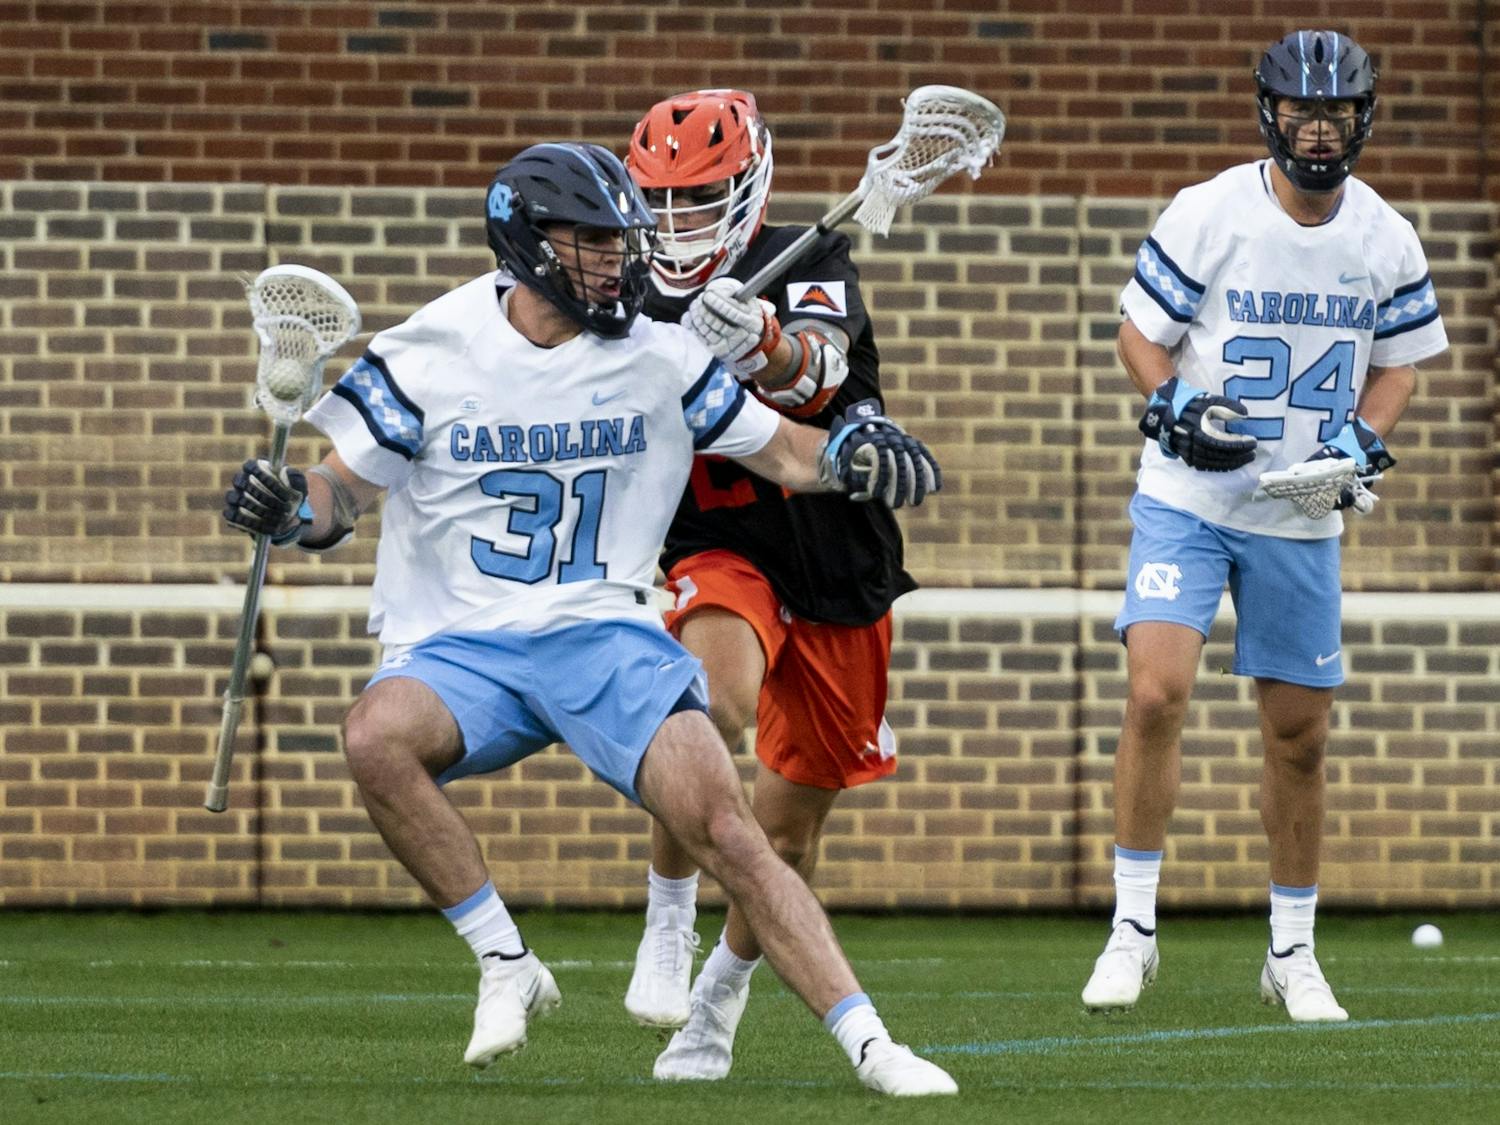 UNC graduate midfielder Connor Maher (31) protects the ball during the men’s lacrosse game against Mercer at Dorrance Field on Friday, Feb. 10, 2023. UNC won 25-3.